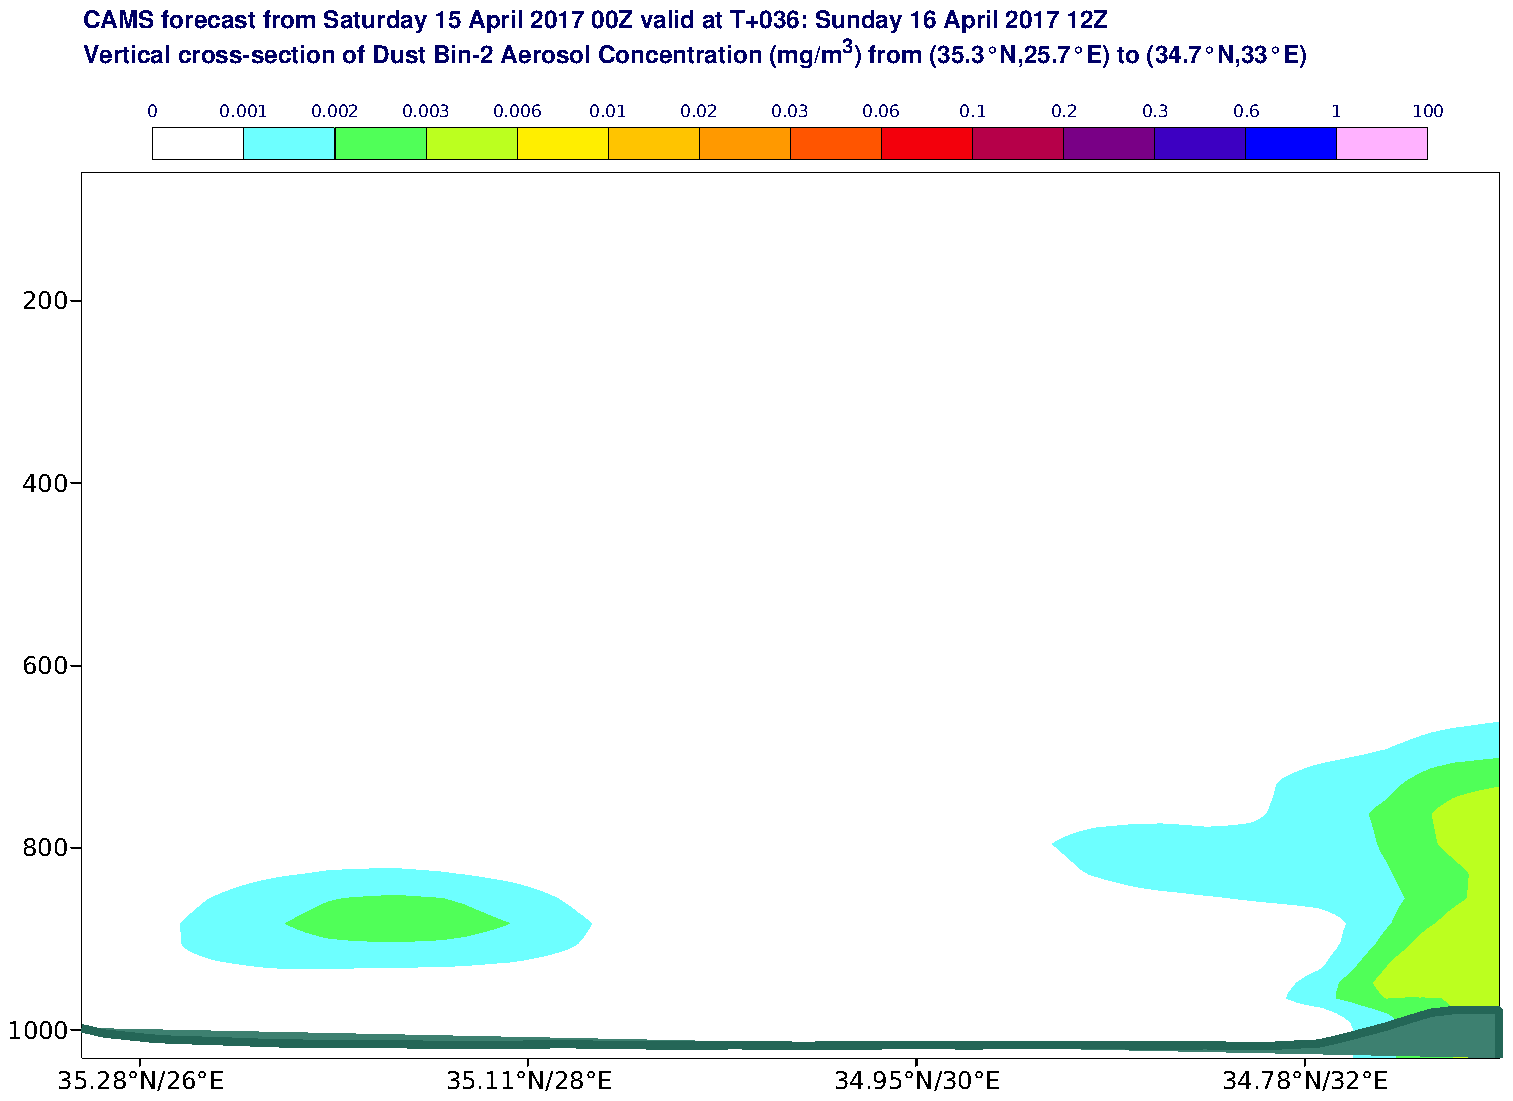 Vertical cross-section of Dust Bin-2 Aerosol Concentration (mg/m3) valid at T36 - 2017-04-16 12:00